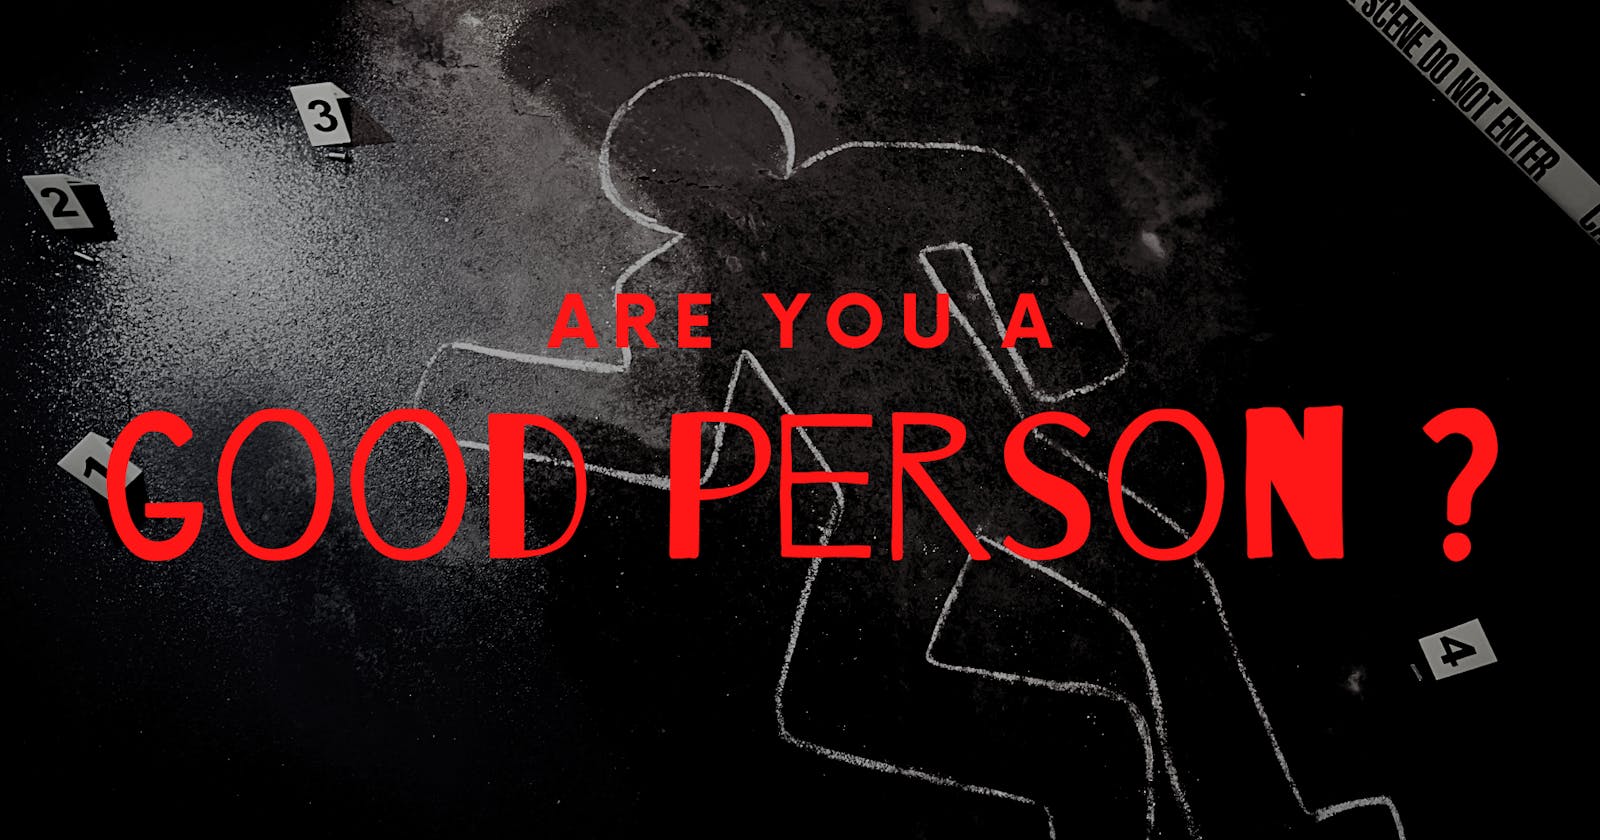 Are you a Good Person?